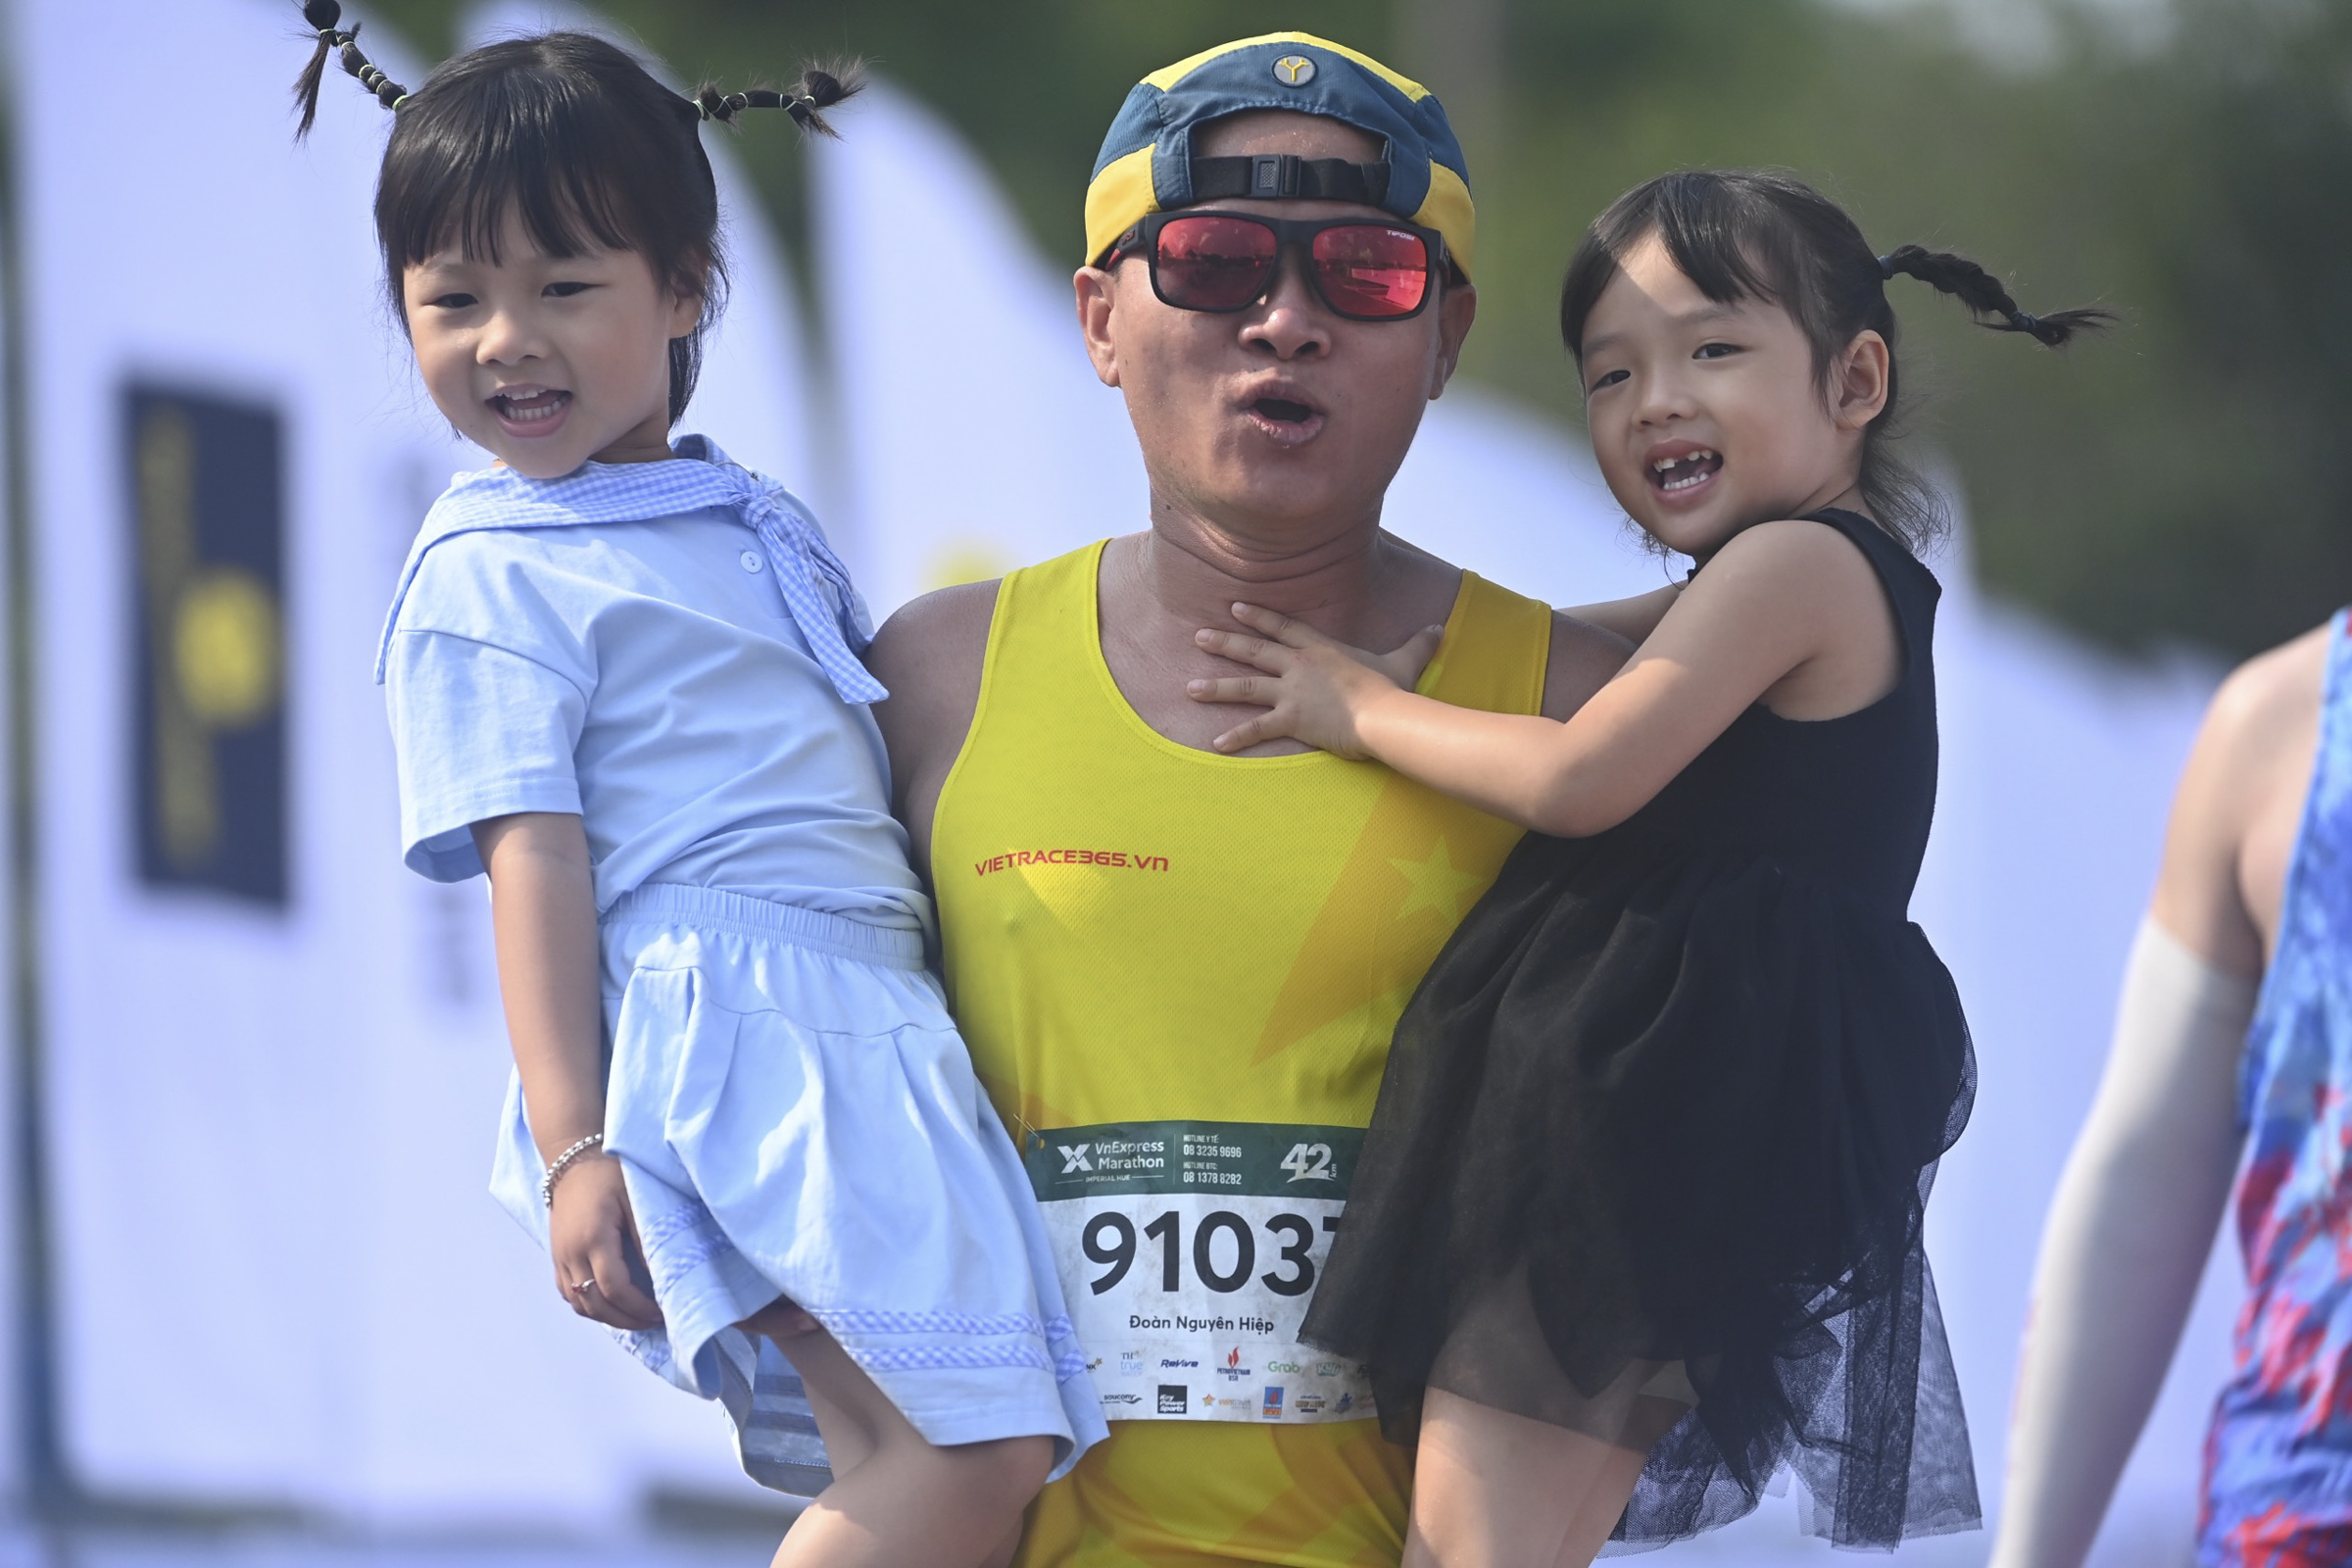 A man picks his daughters up after finishing his 42km run.